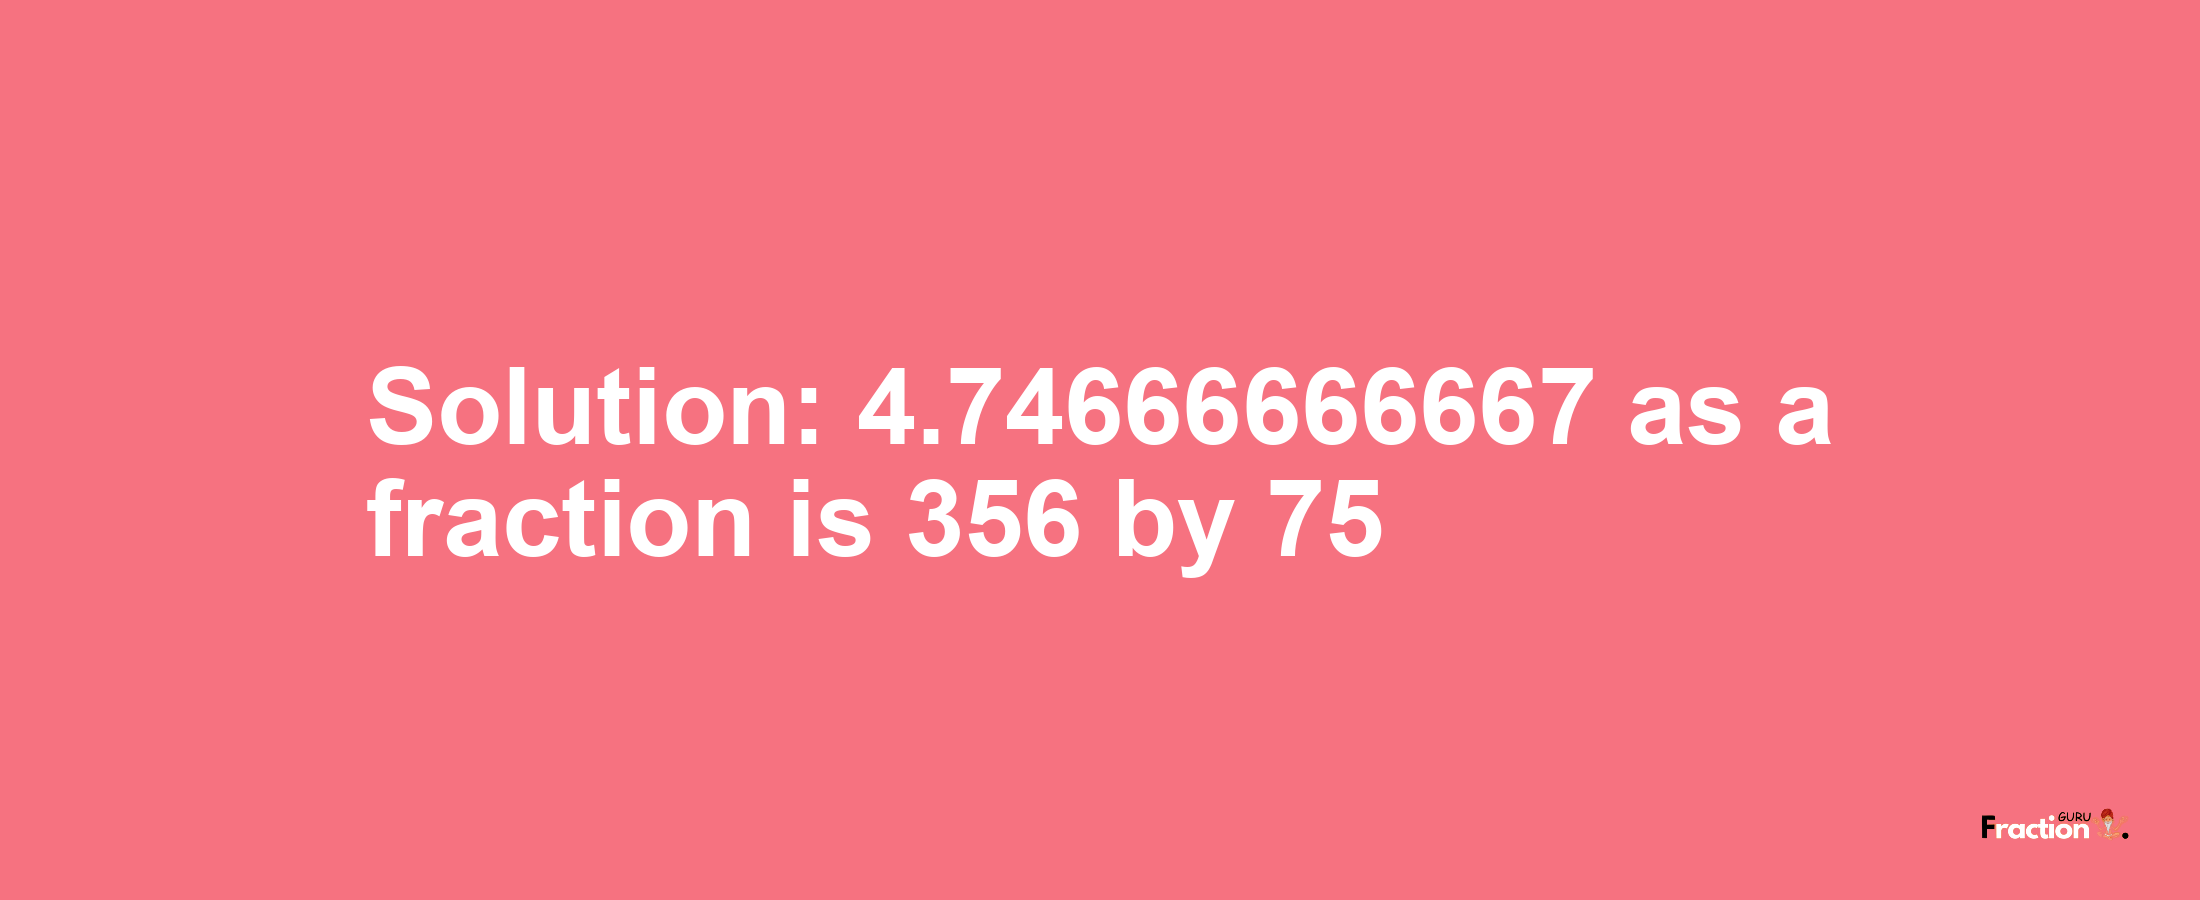 Solution:4.74666666667 as a fraction is 356/75